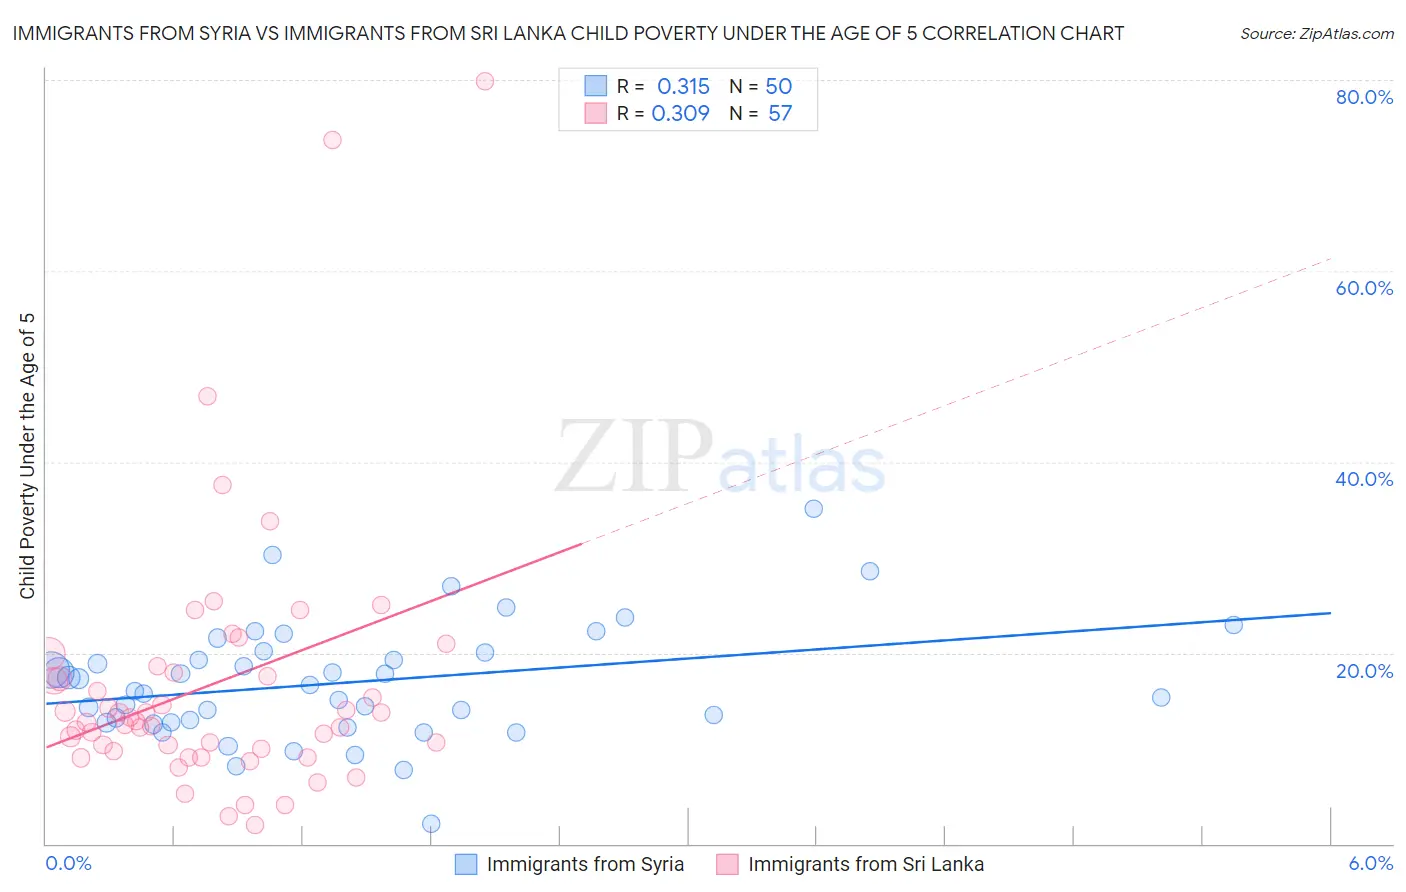 Immigrants from Syria vs Immigrants from Sri Lanka Child Poverty Under the Age of 5